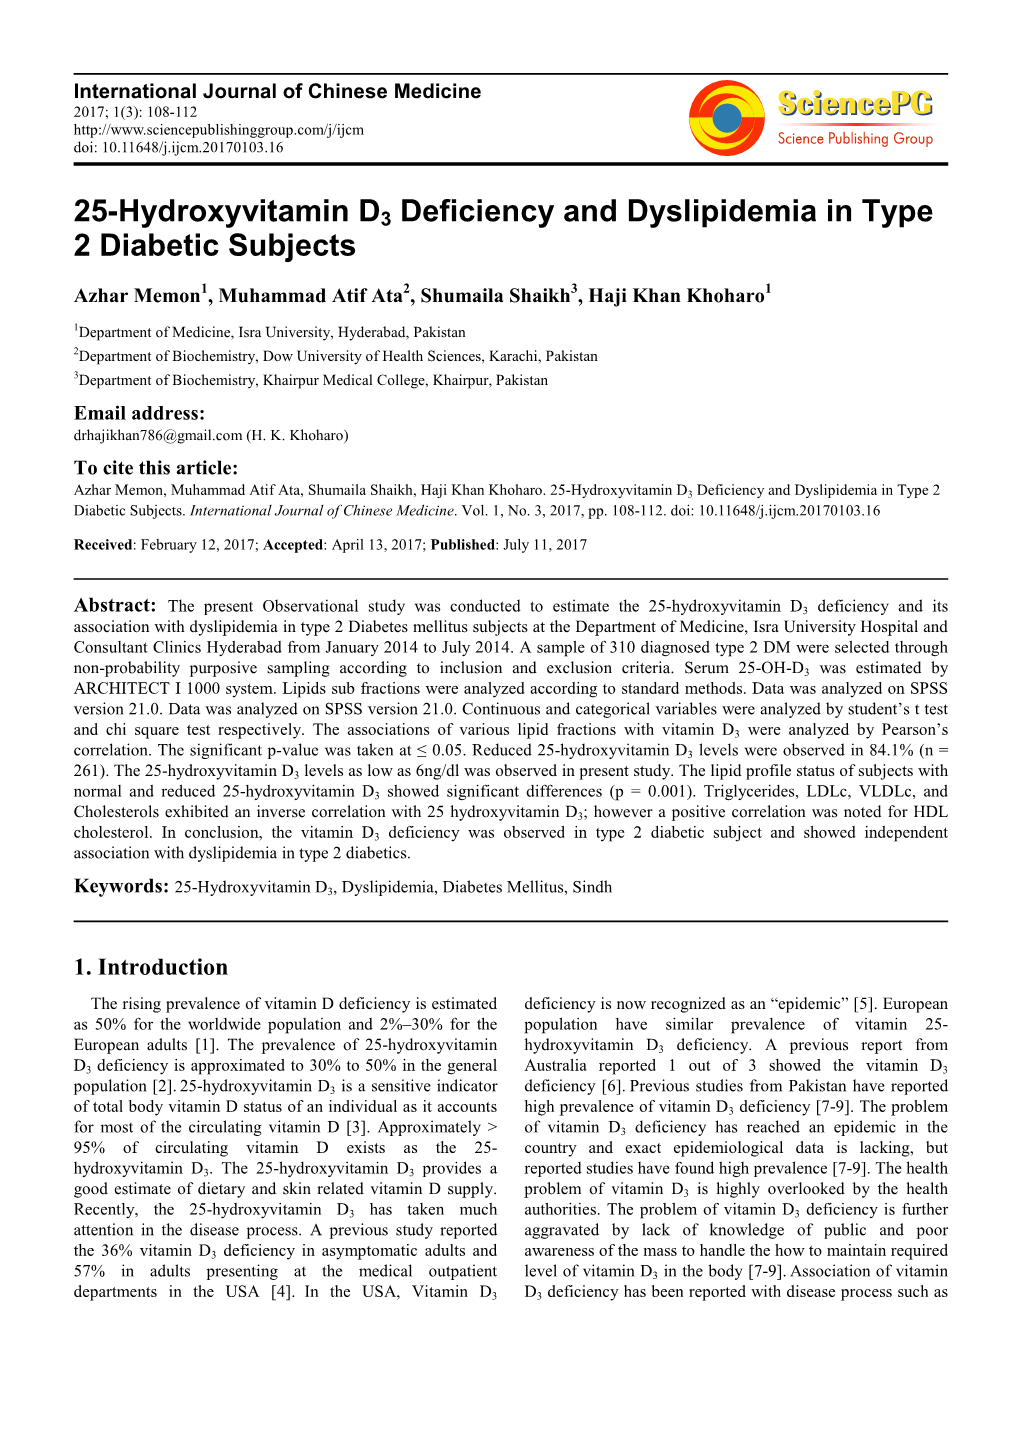 25-Hydroxyvitamin D3 Deficiency and Dyslipidemia in Type 2 Diabetic Subjects